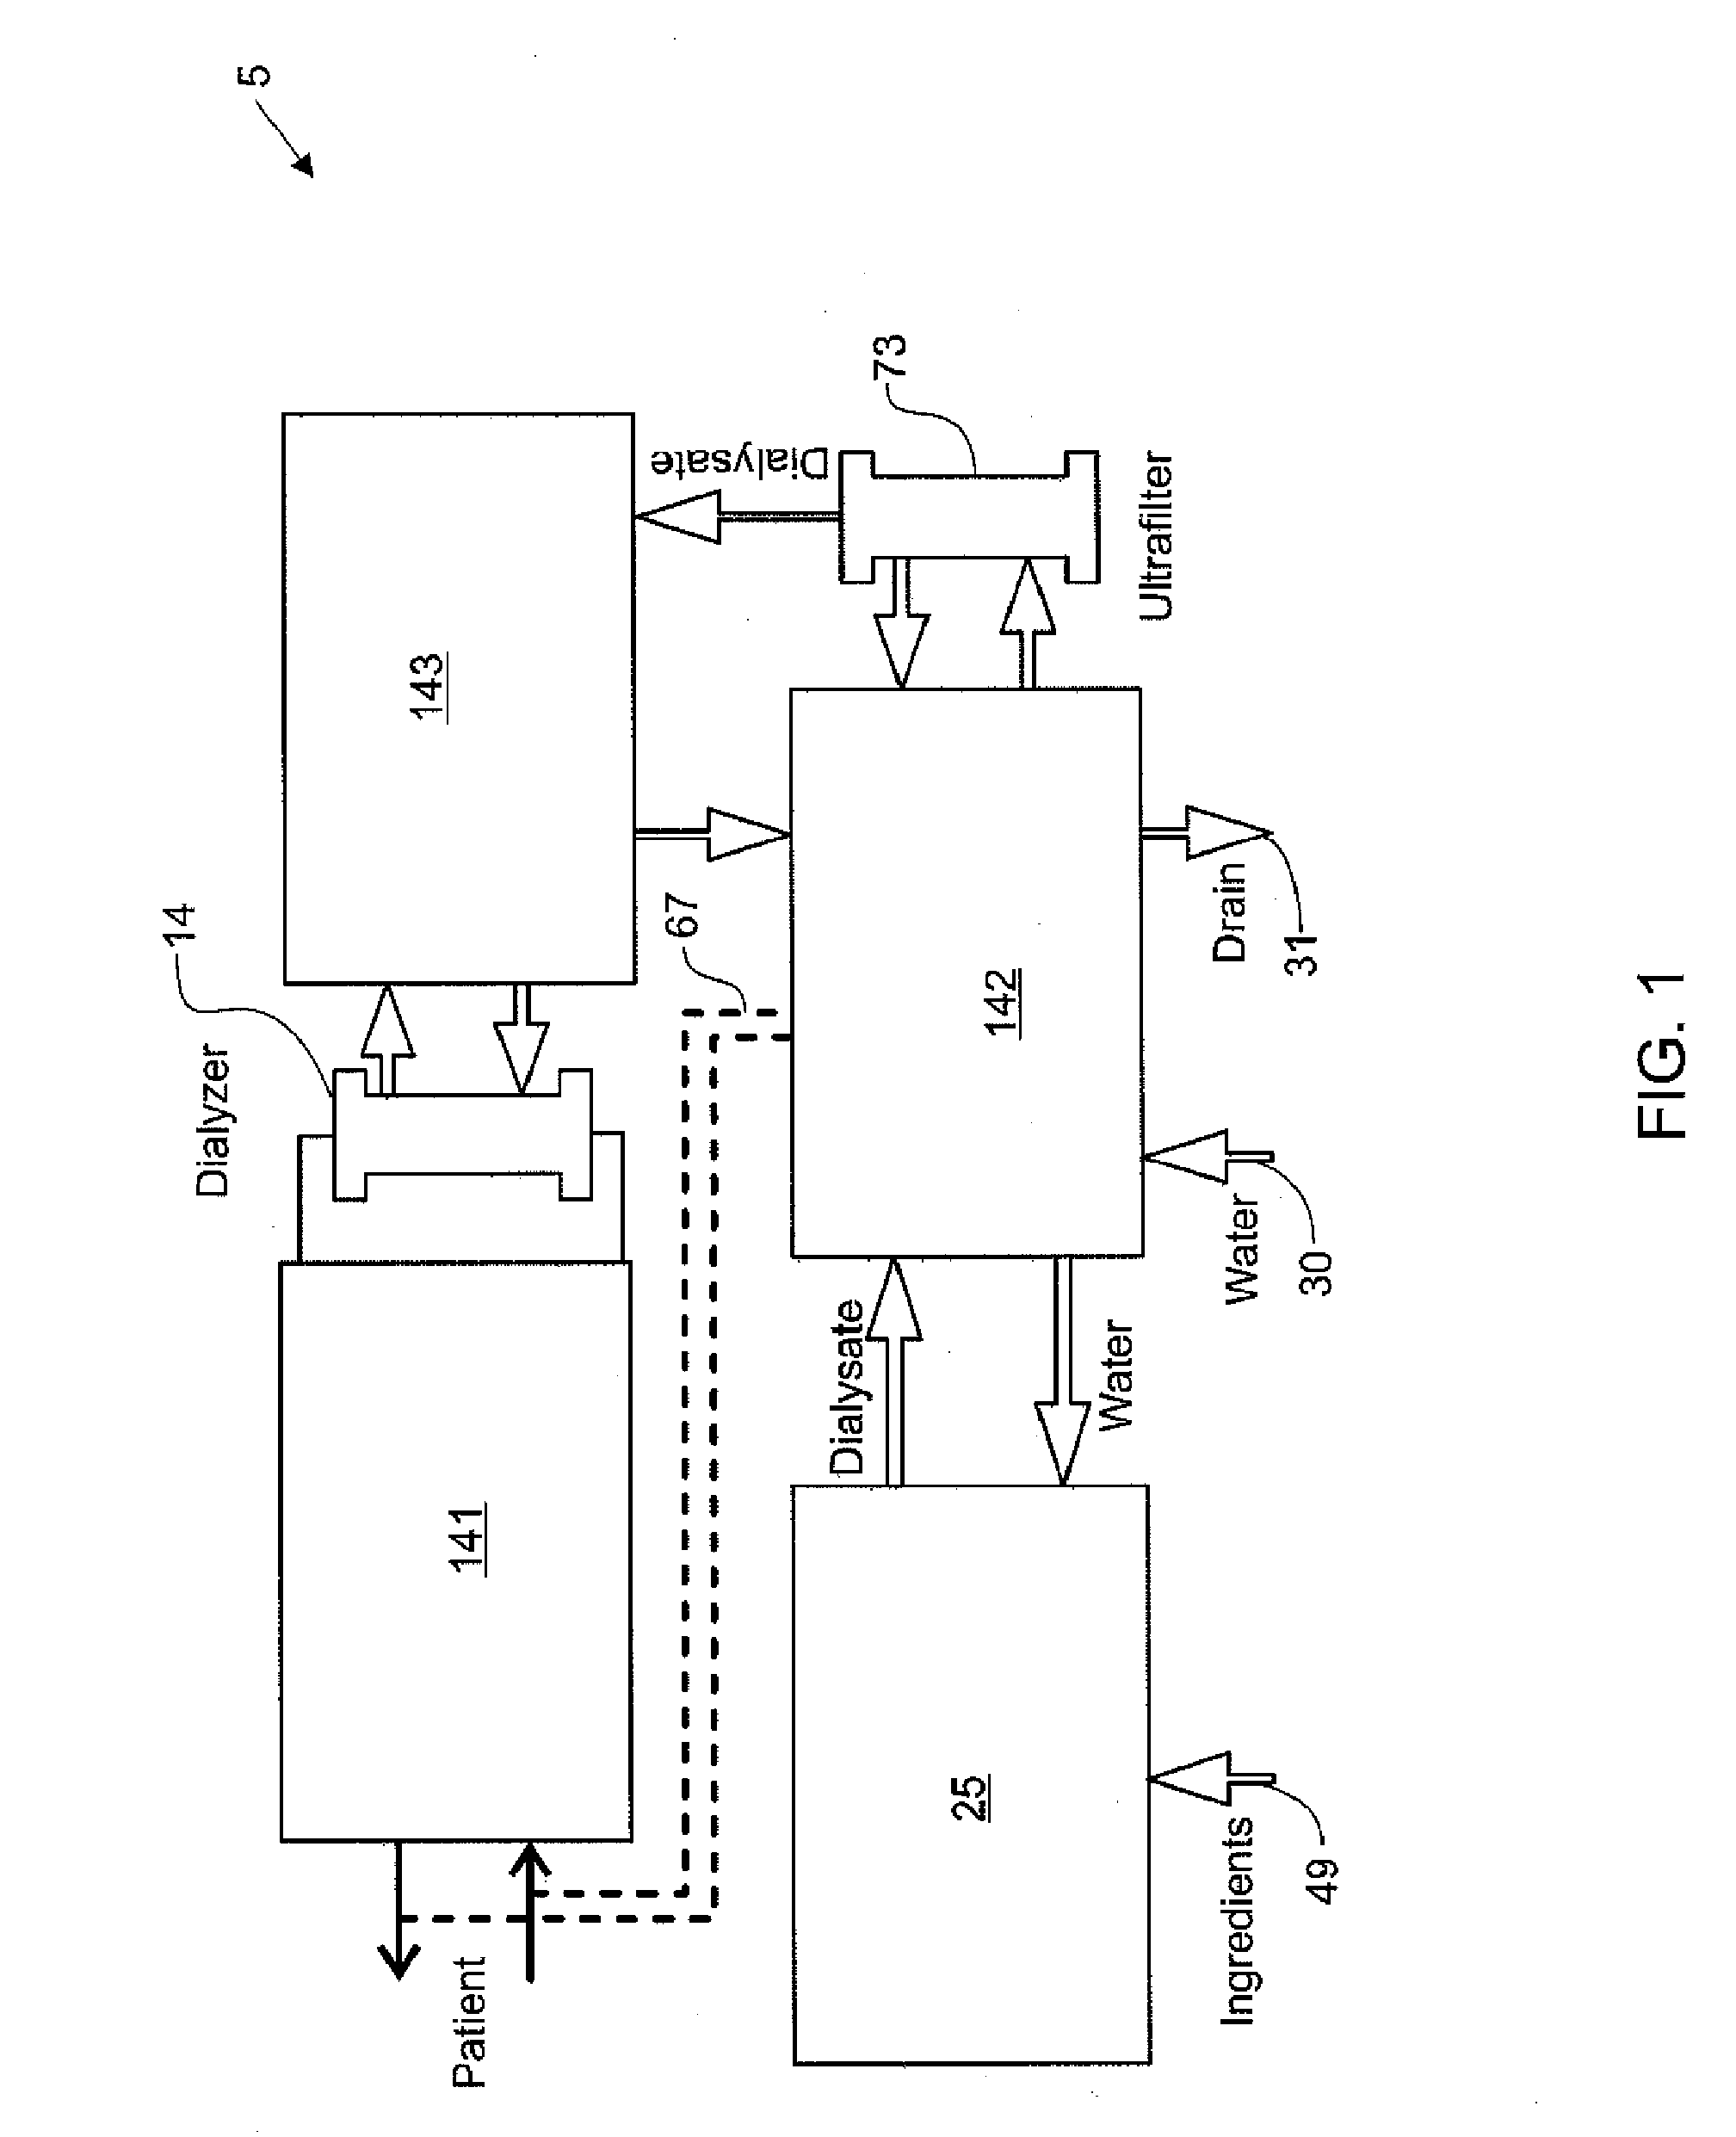 Modular assembly for a portable hemodialysis system